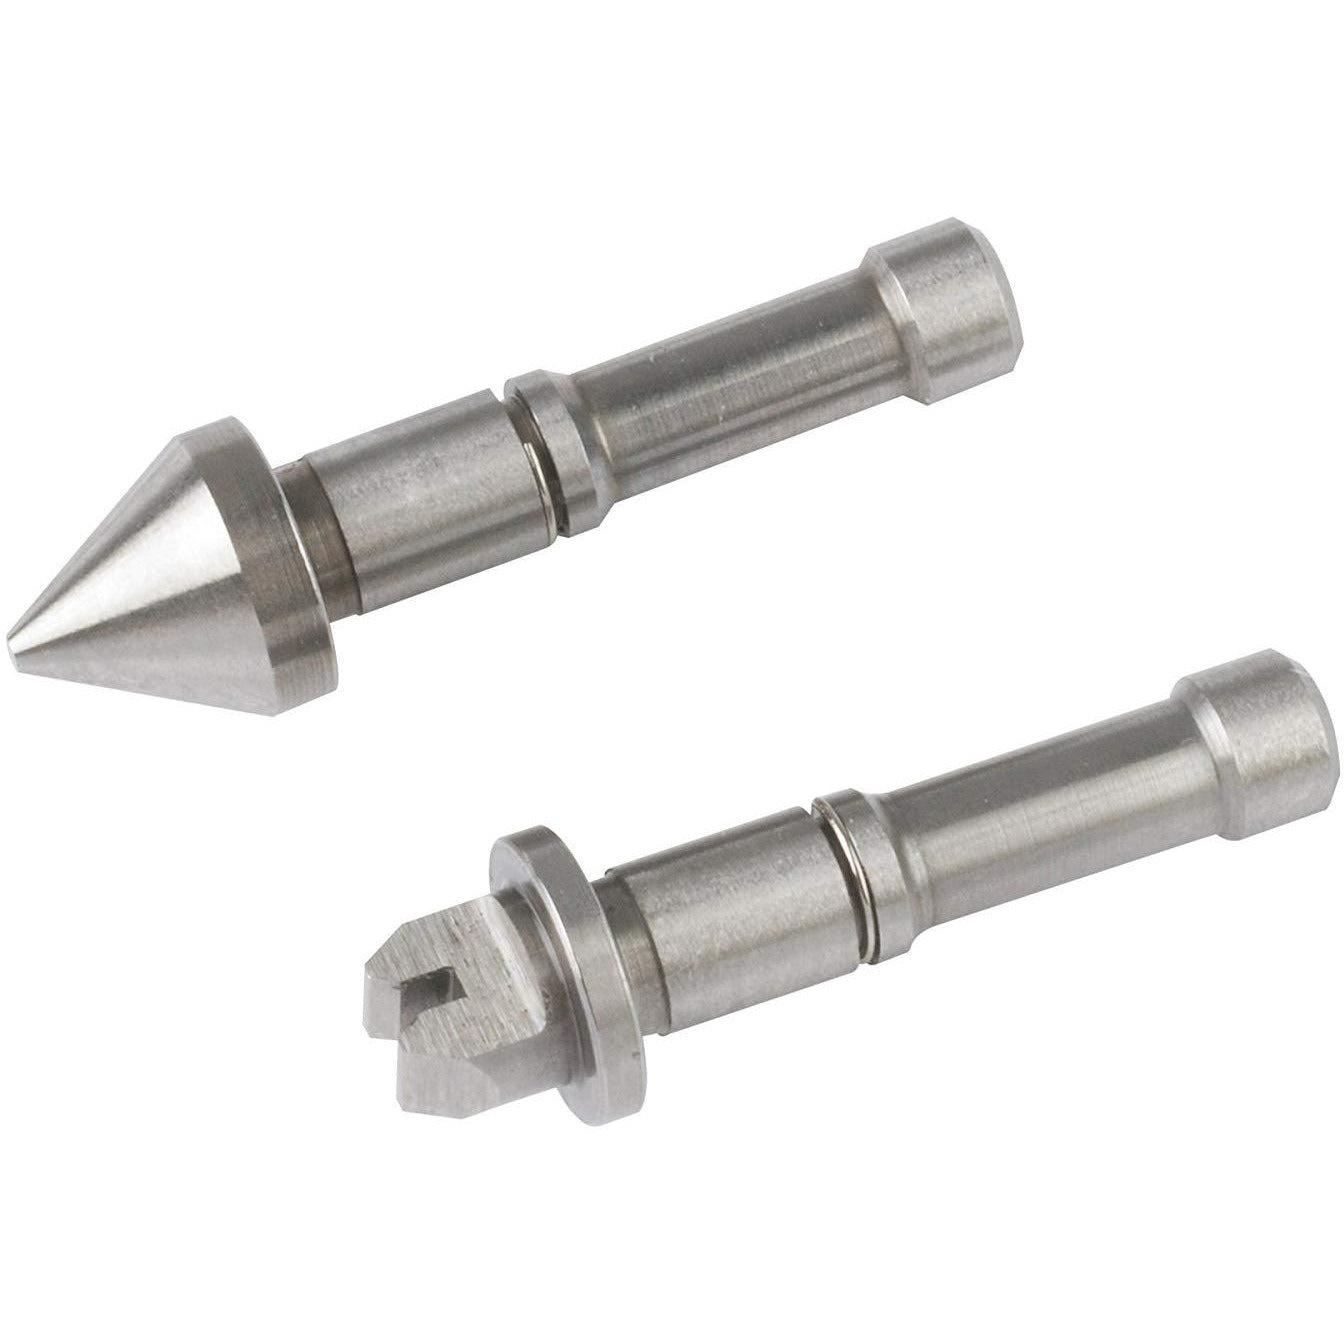 Mitutoyo Anvil and Spindle Tip 0.4-0.5mm/64-48TPI-Mitutoyo-Tool Factory